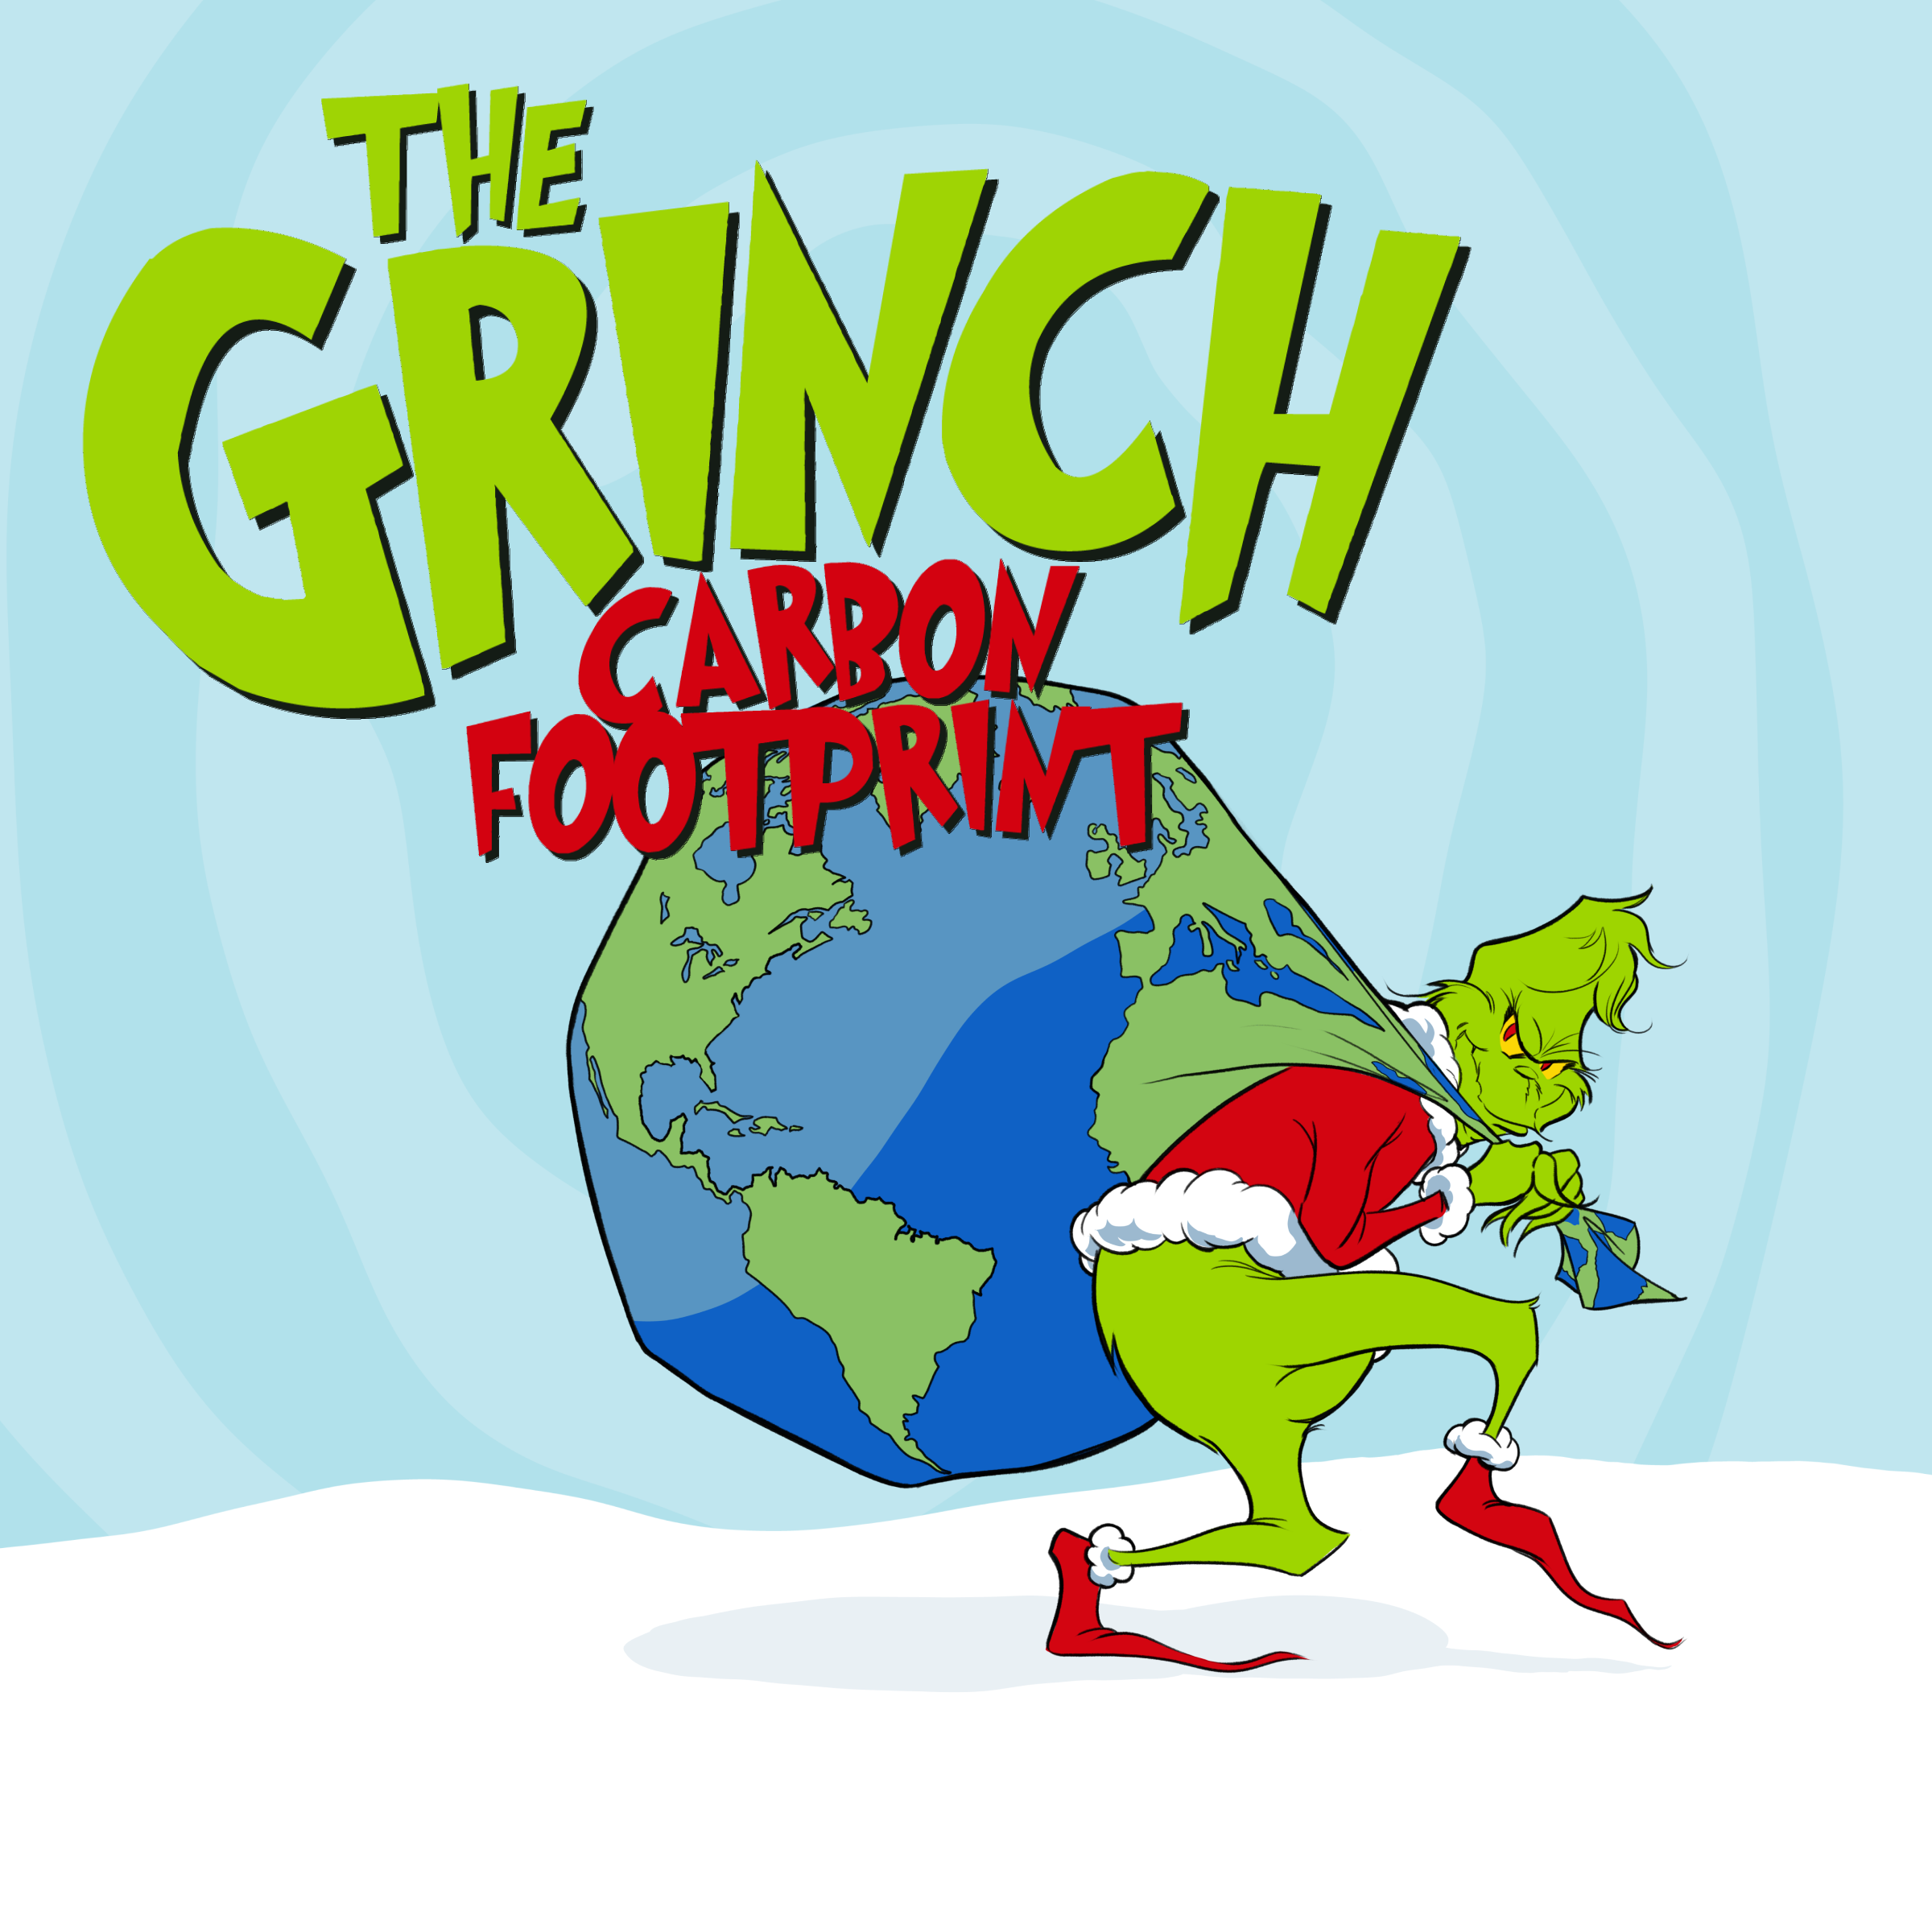 Illustration of the grinch carrying the world on his back